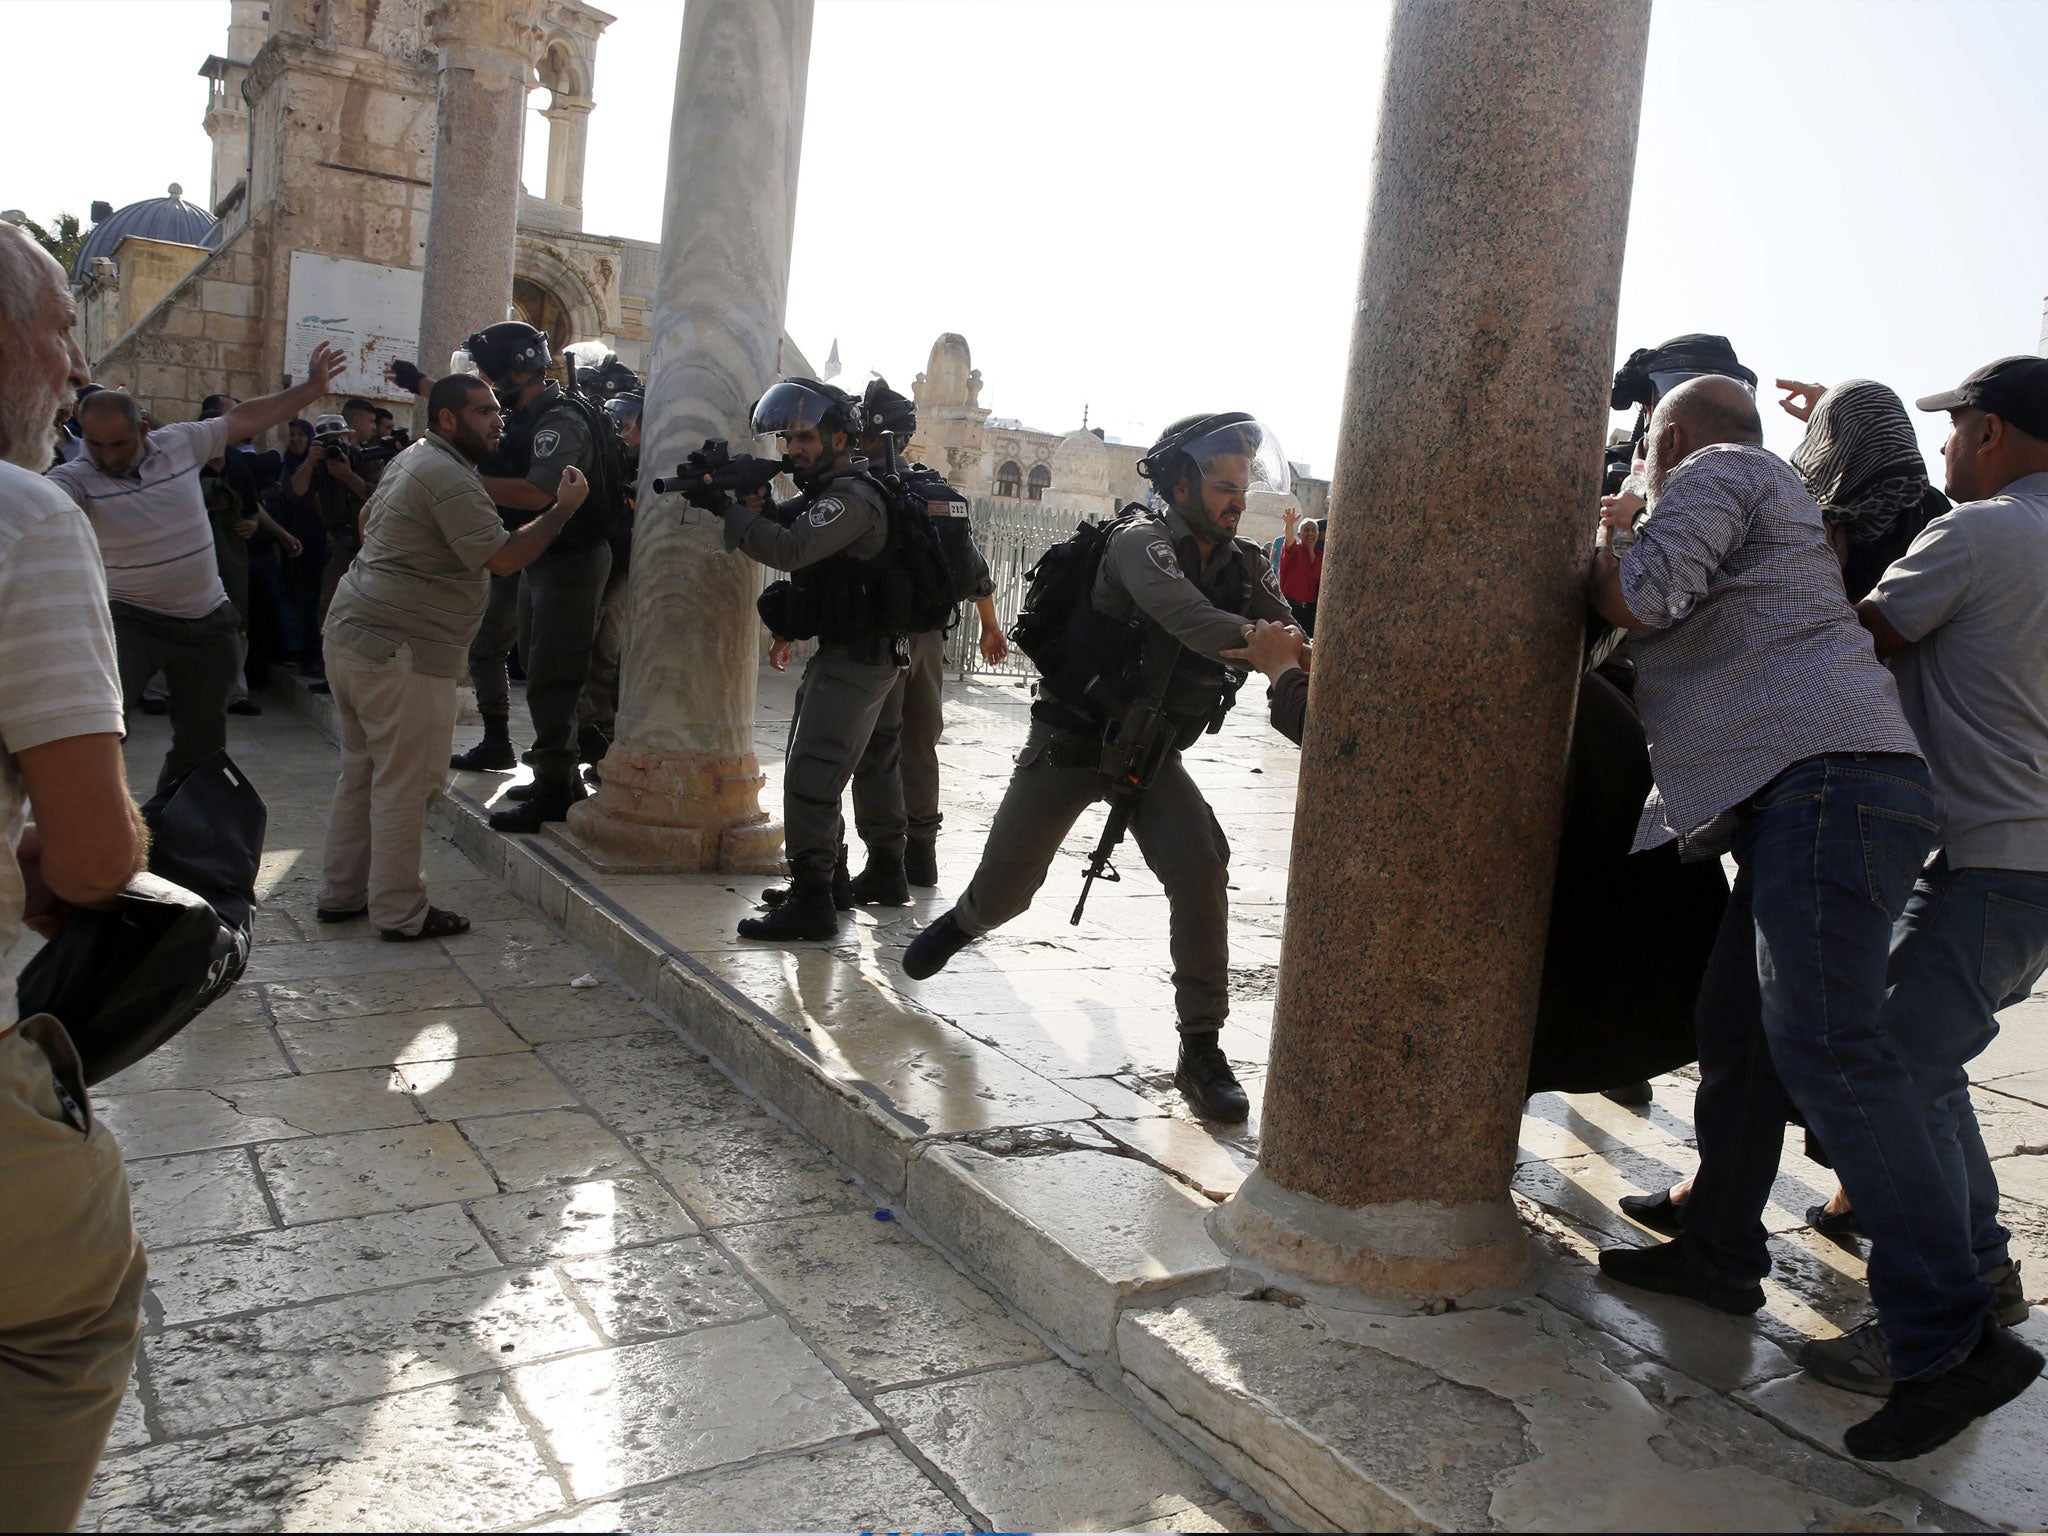 An Israeli police officer aims his weapon at Palestinians during clashes at the Al Aqsa Mosque